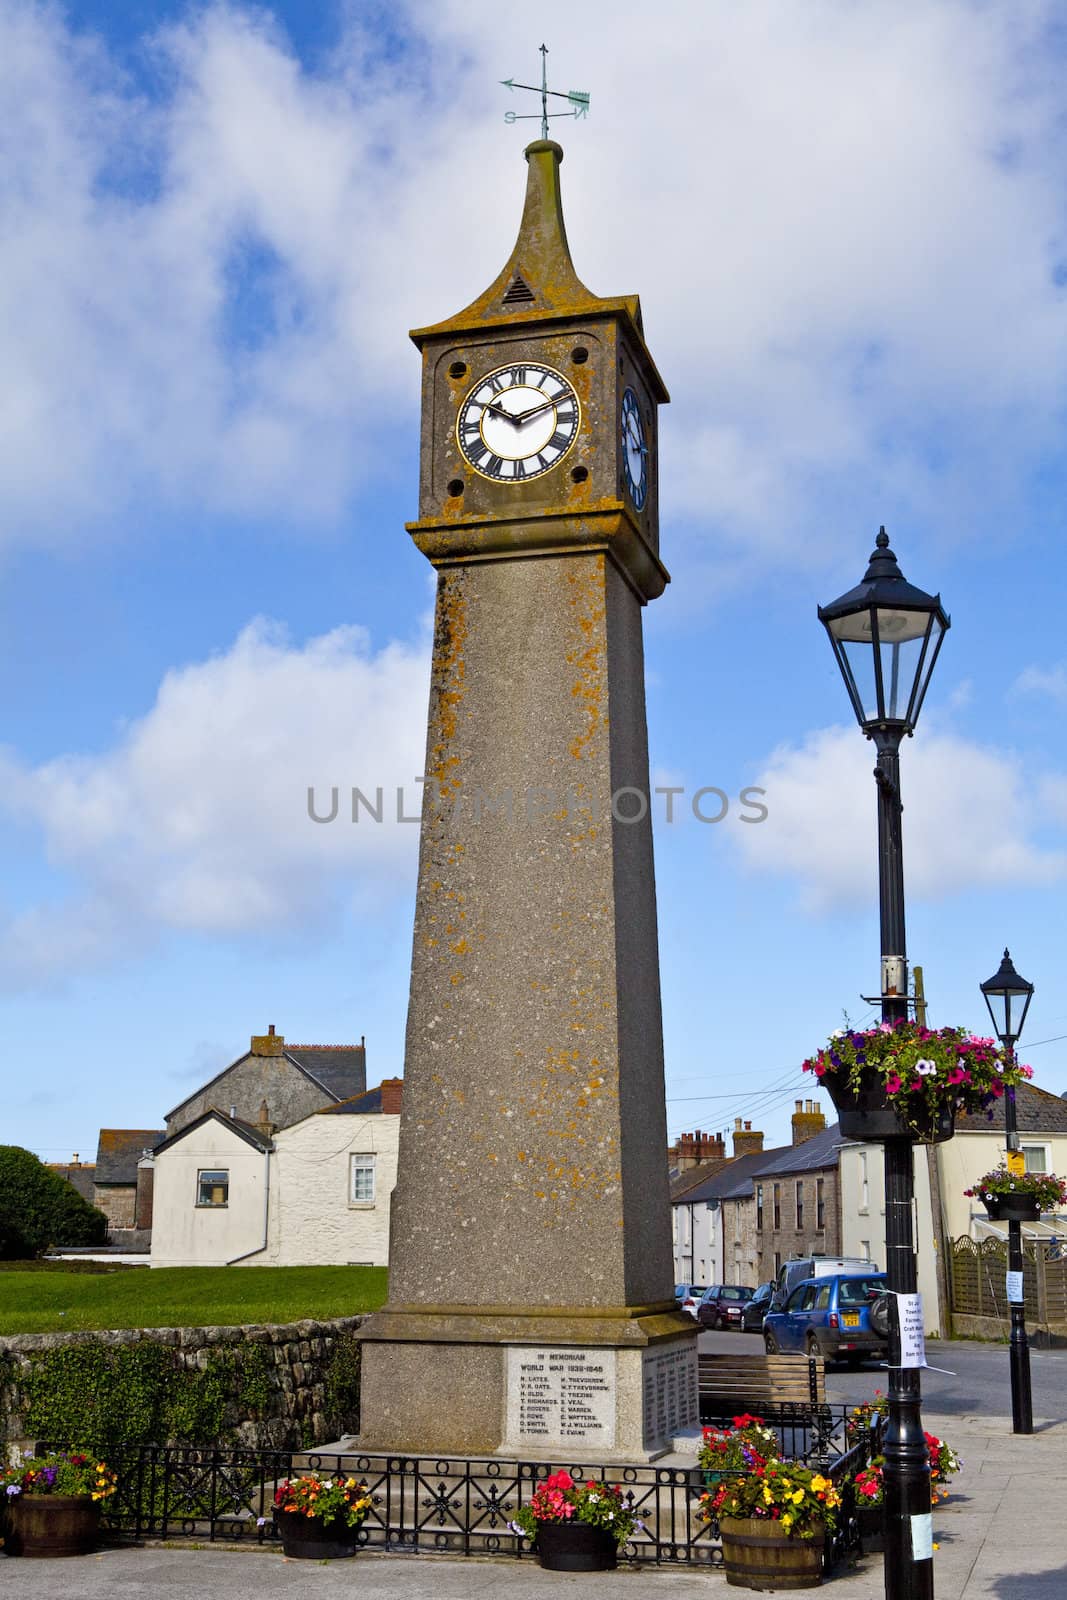 The clock tower in St. Just, Cornwall.